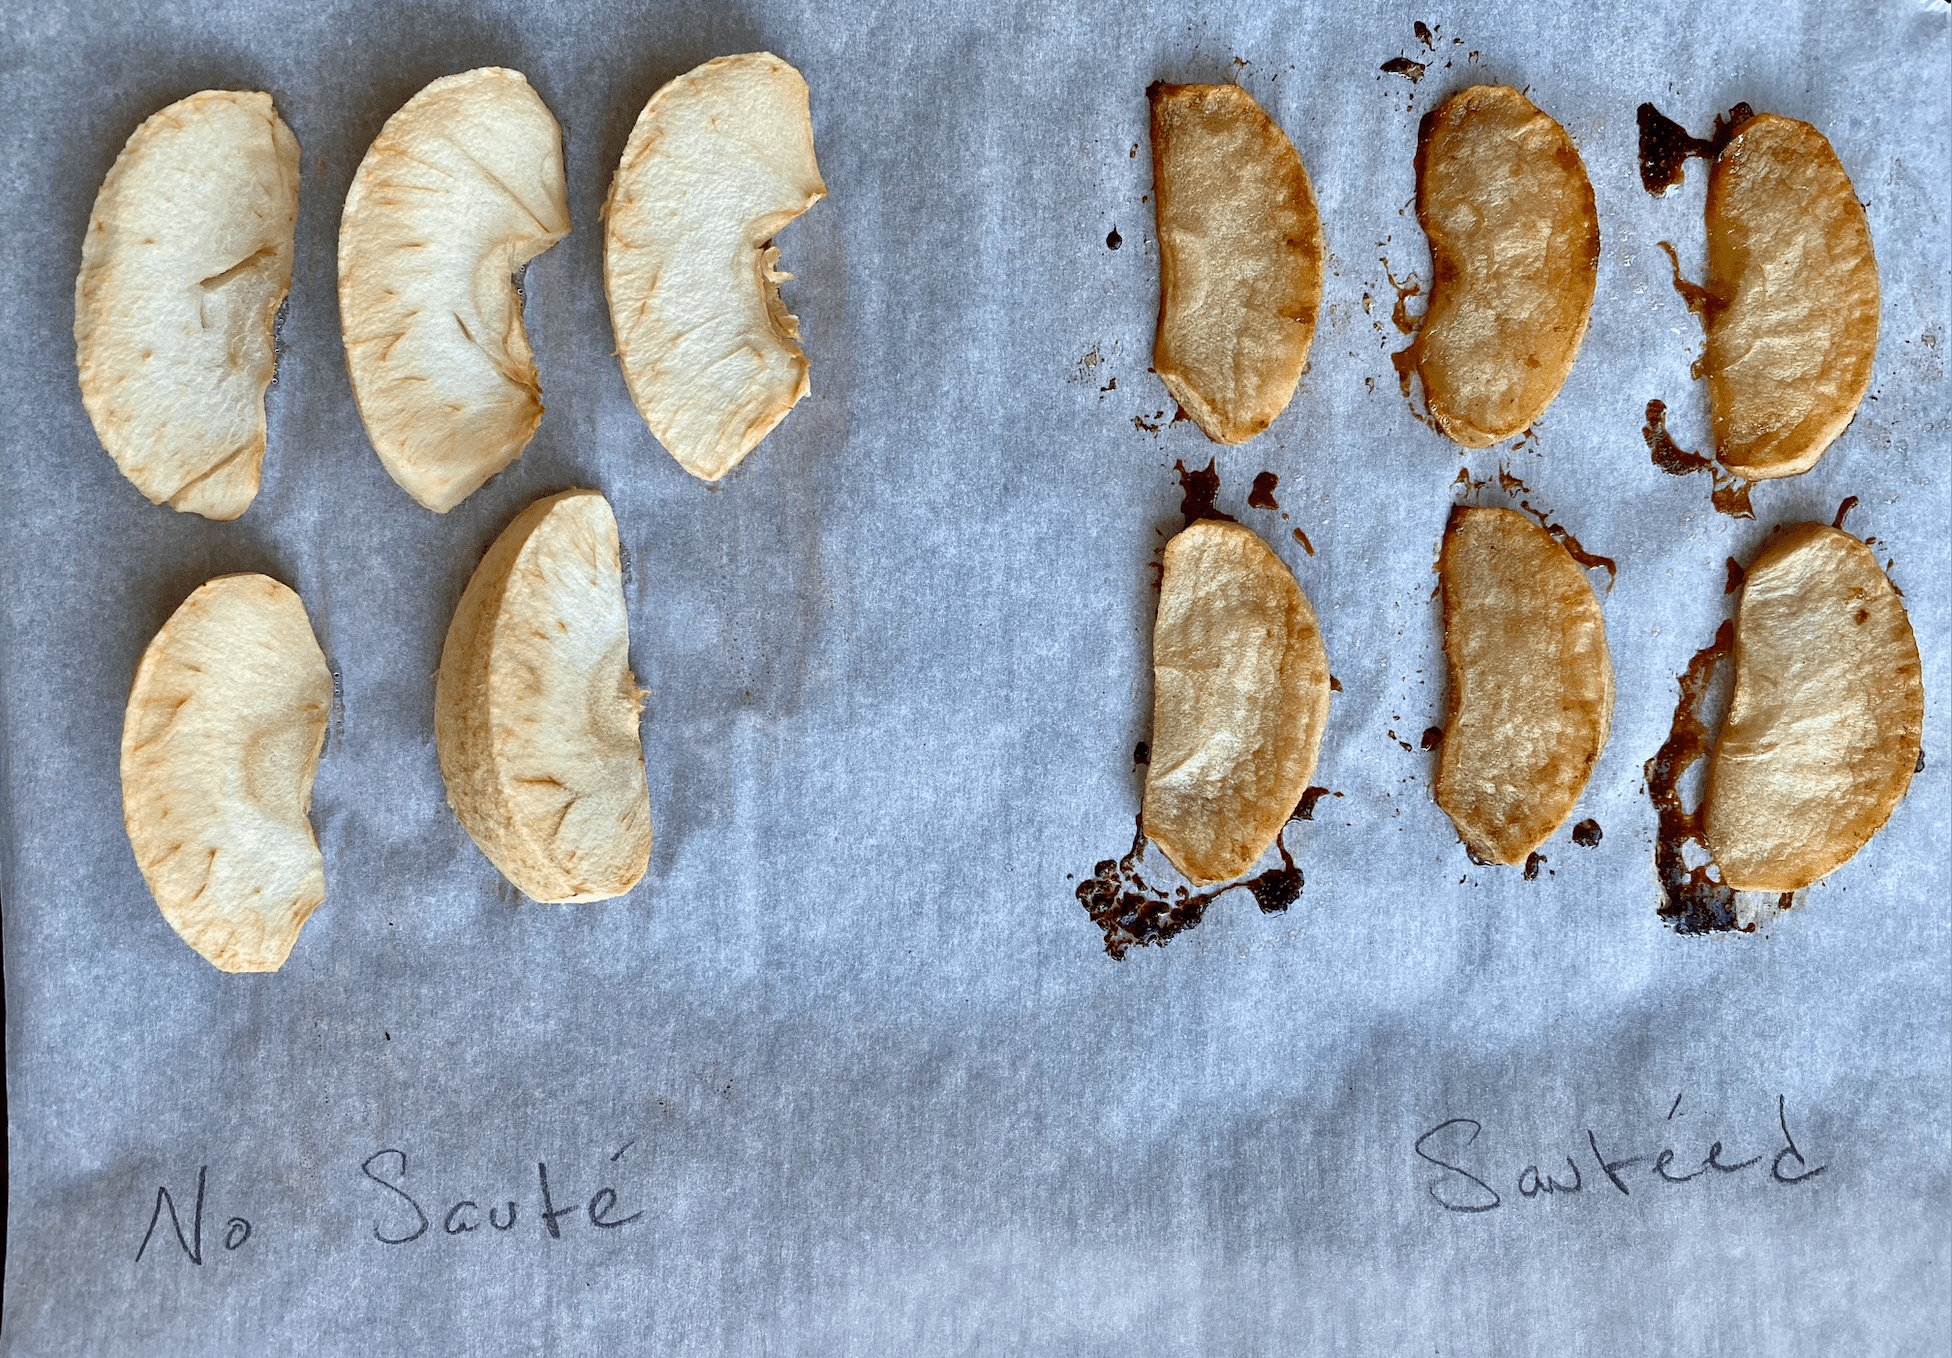 After baking. Left: Apples with nothing added. Right: Apples sautéed in only butter before baking. (Photo: Allie Chanthorn Reinmann)